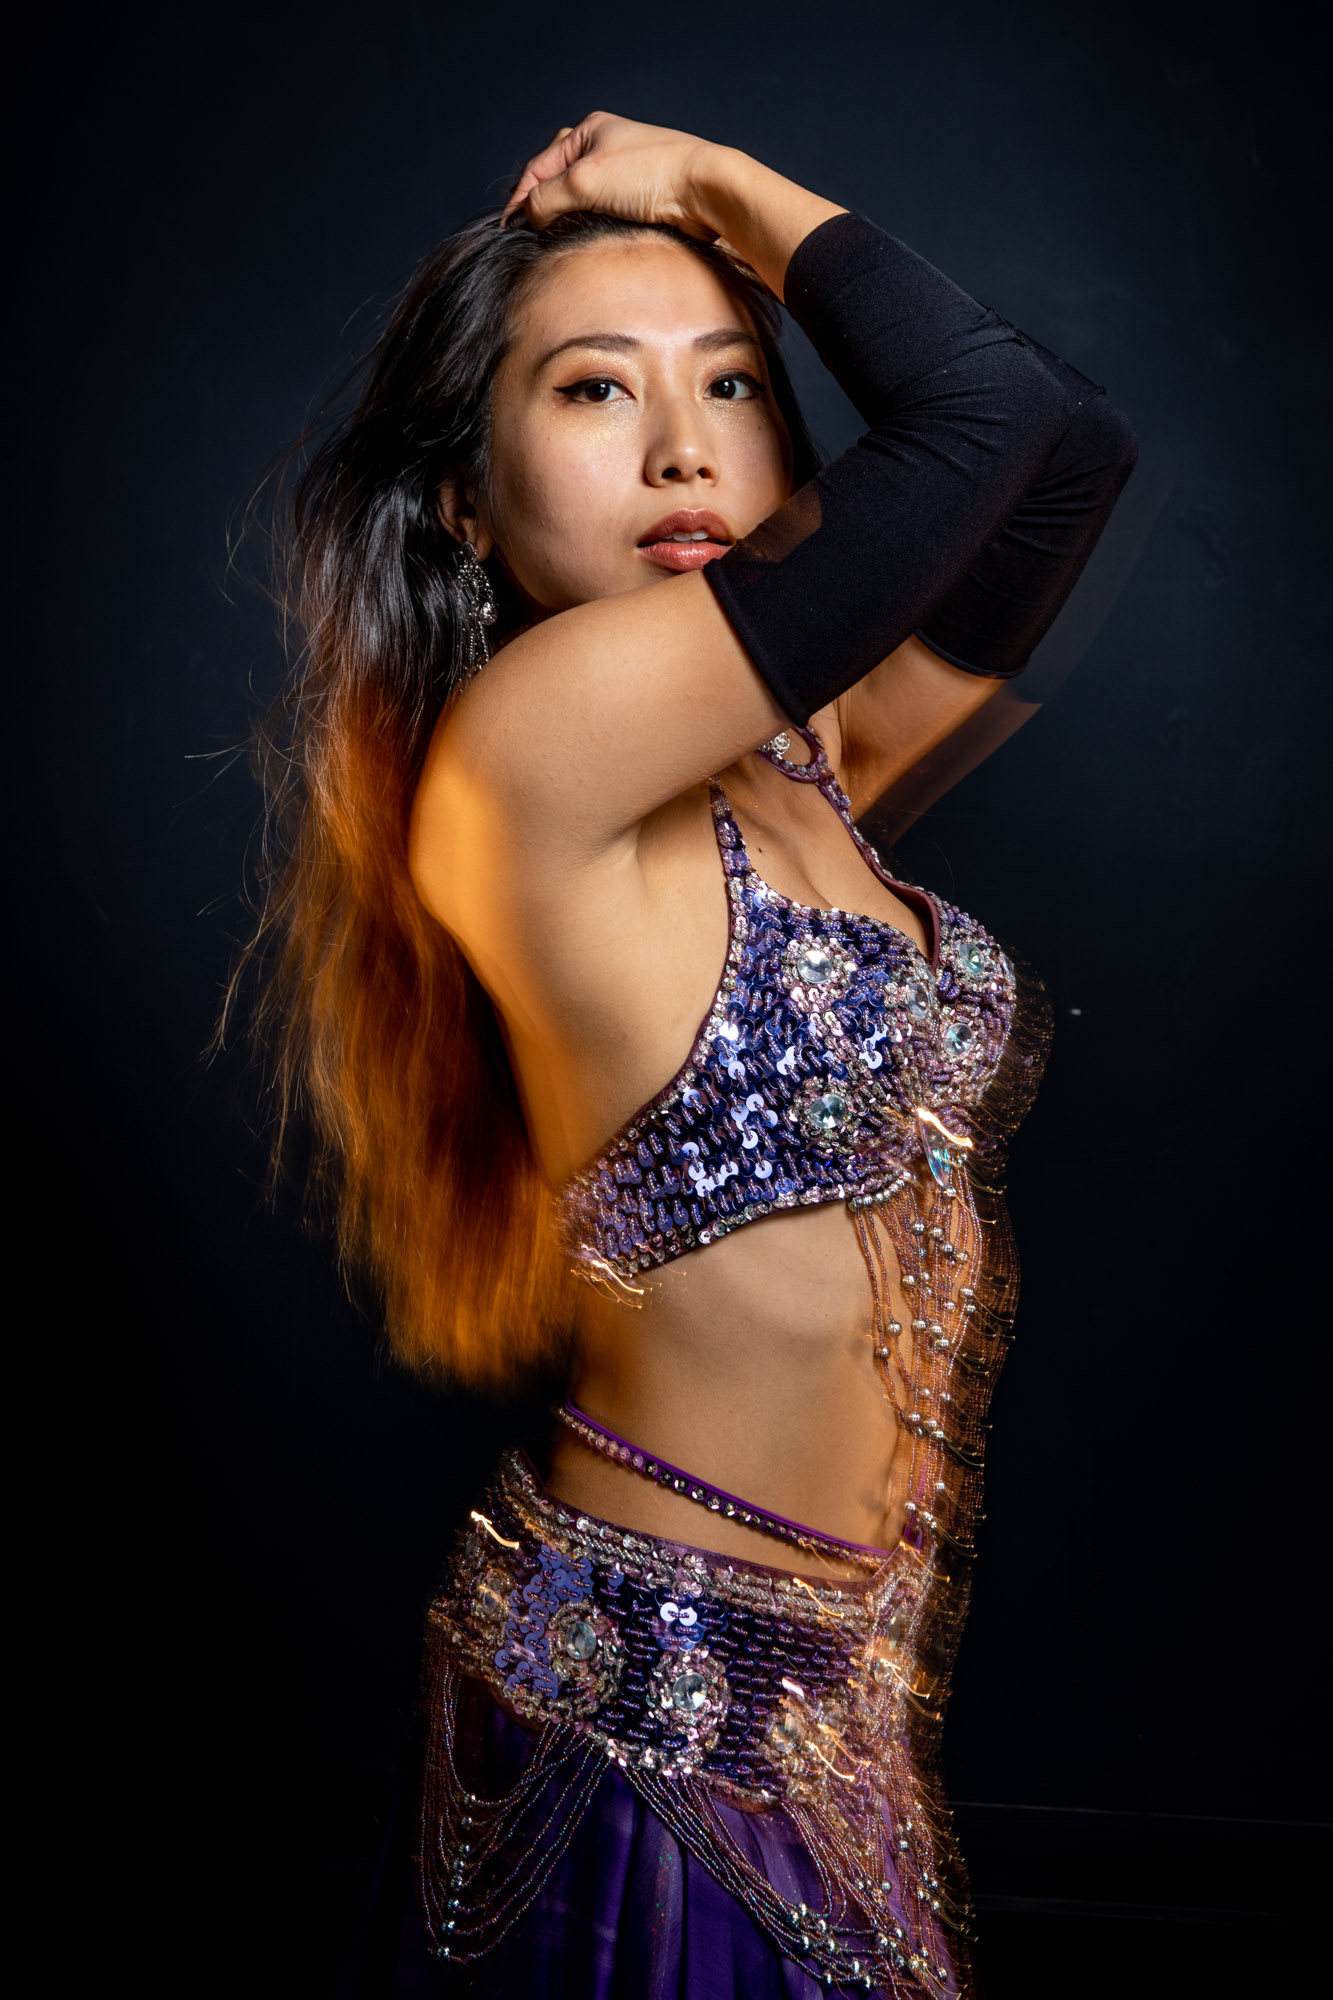 A belly dancer posing for a portrait